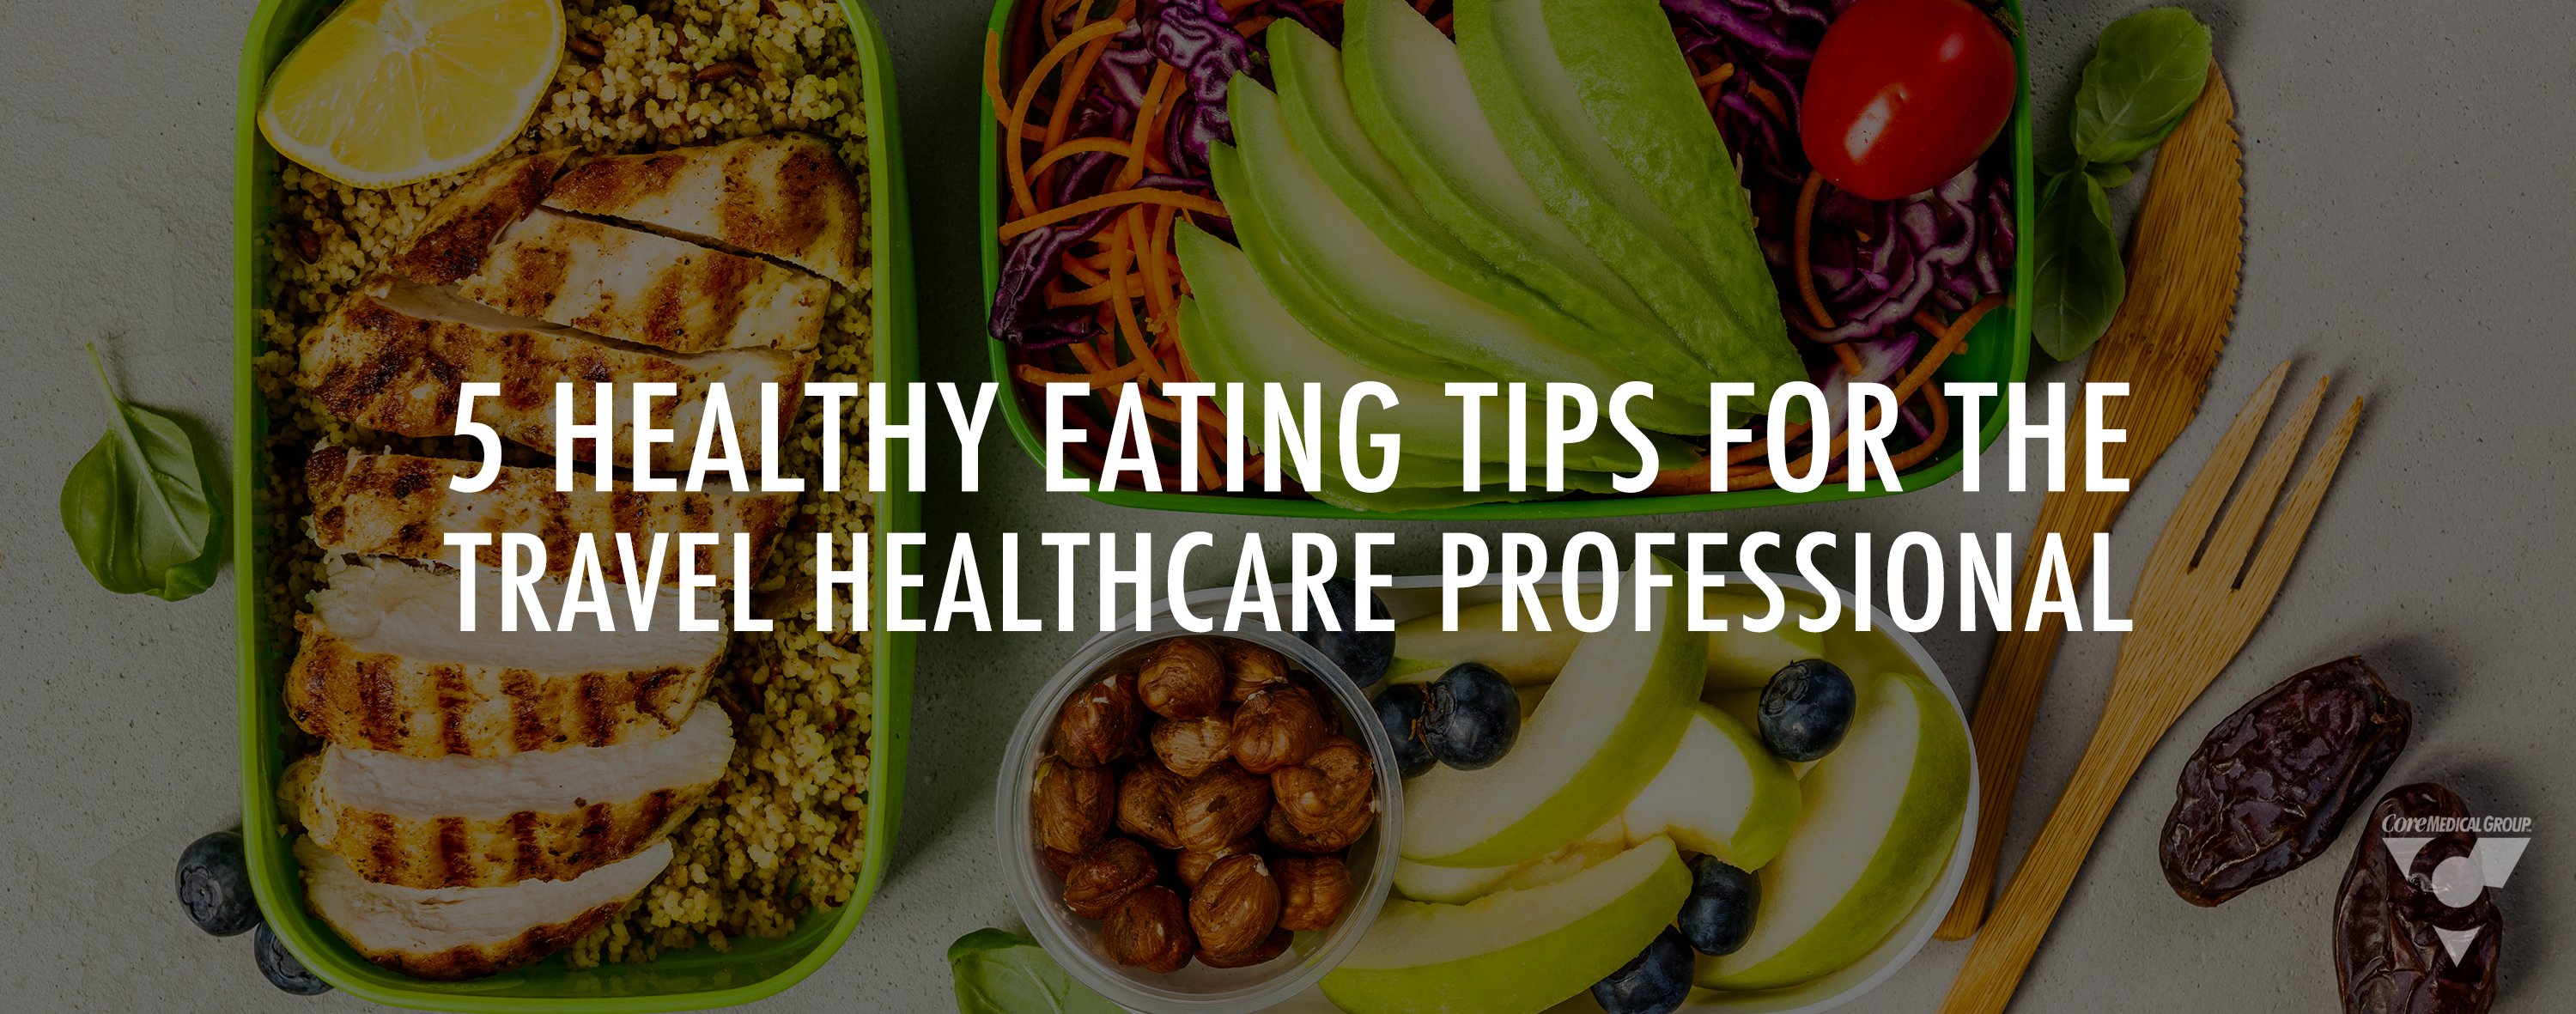 5 healthy eating tips for healthcare professionals